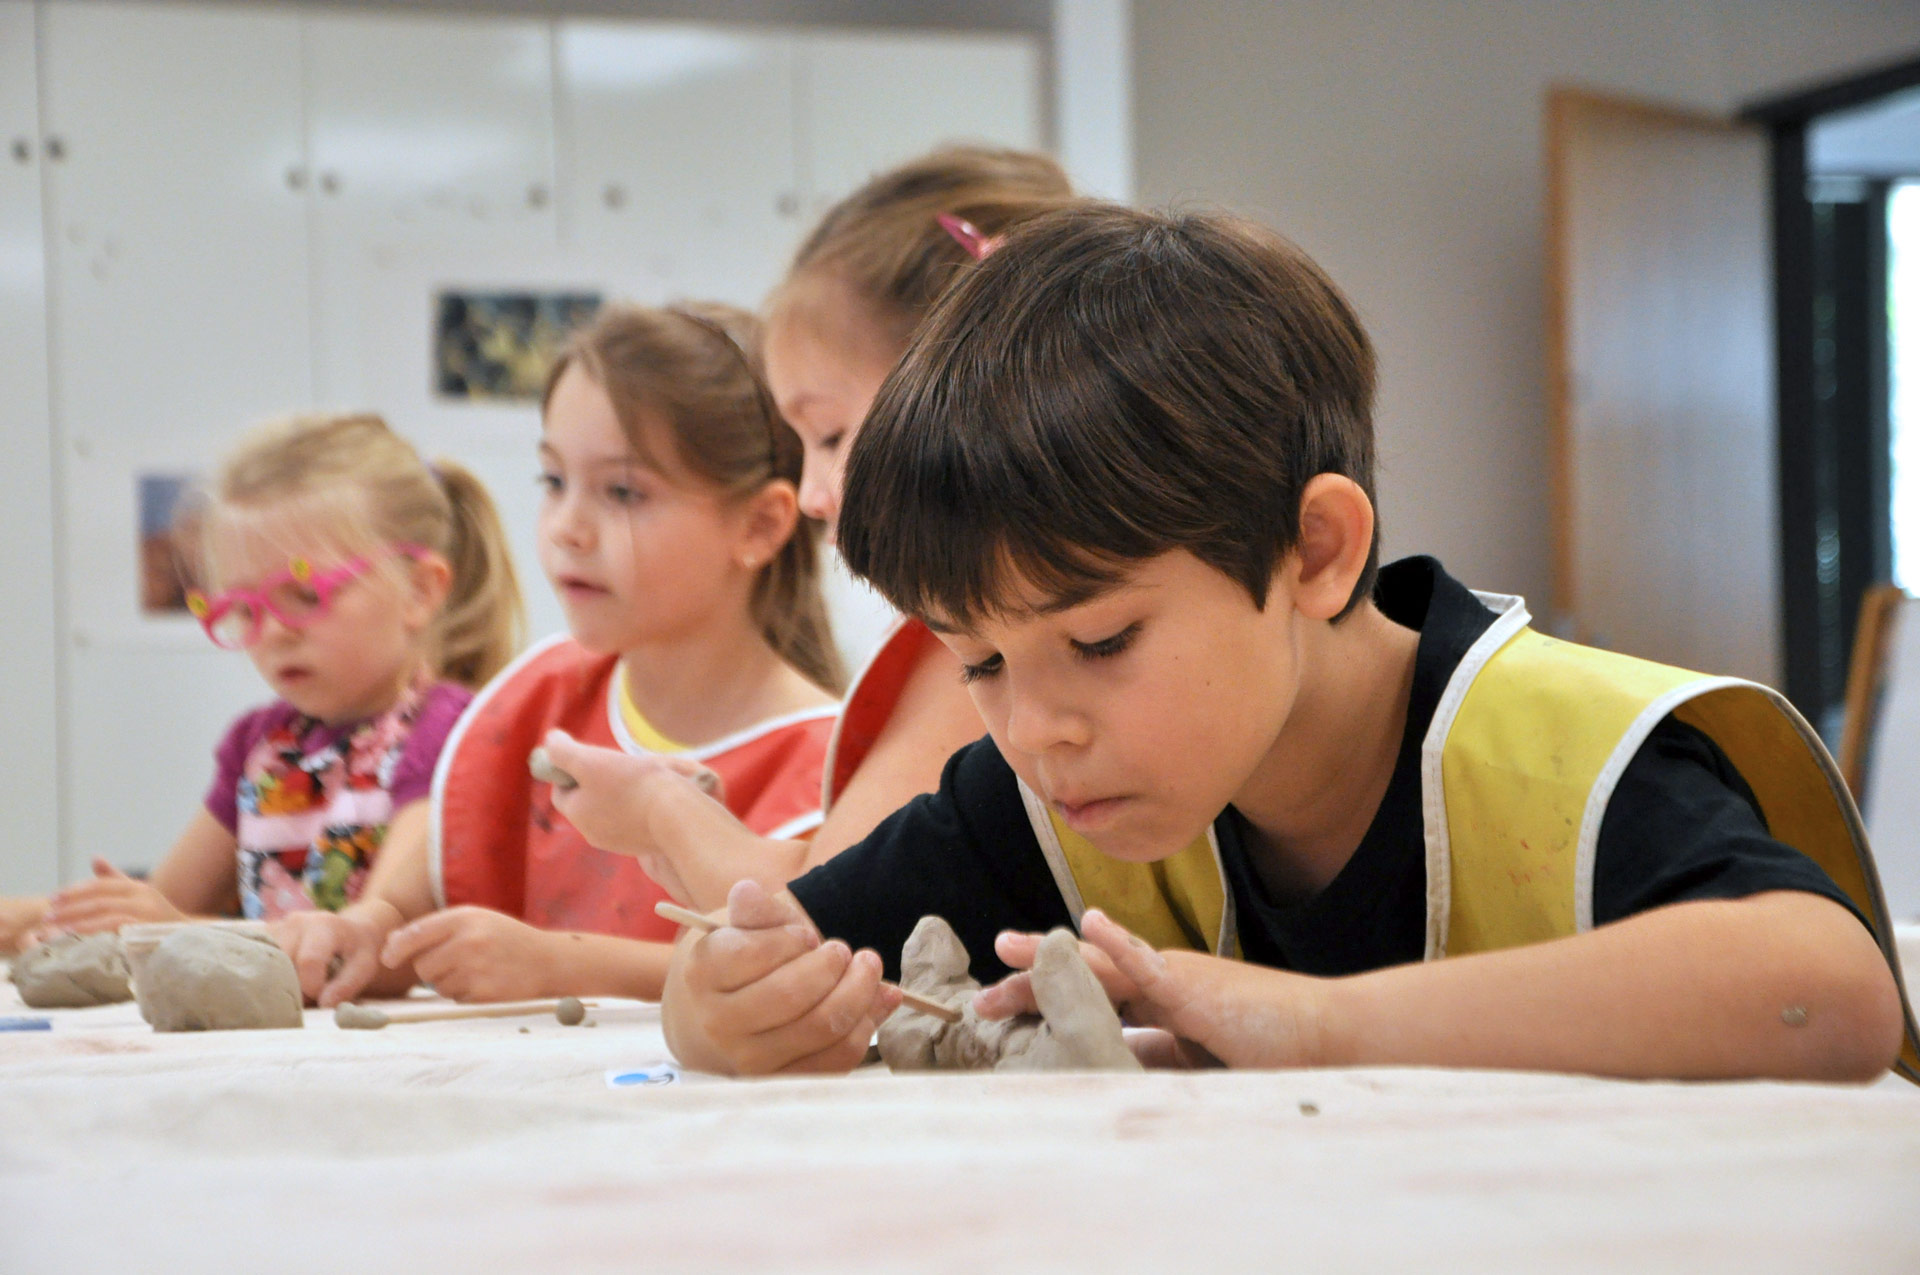 Art School for Children begins its fall series with ‘Art of Scotland’